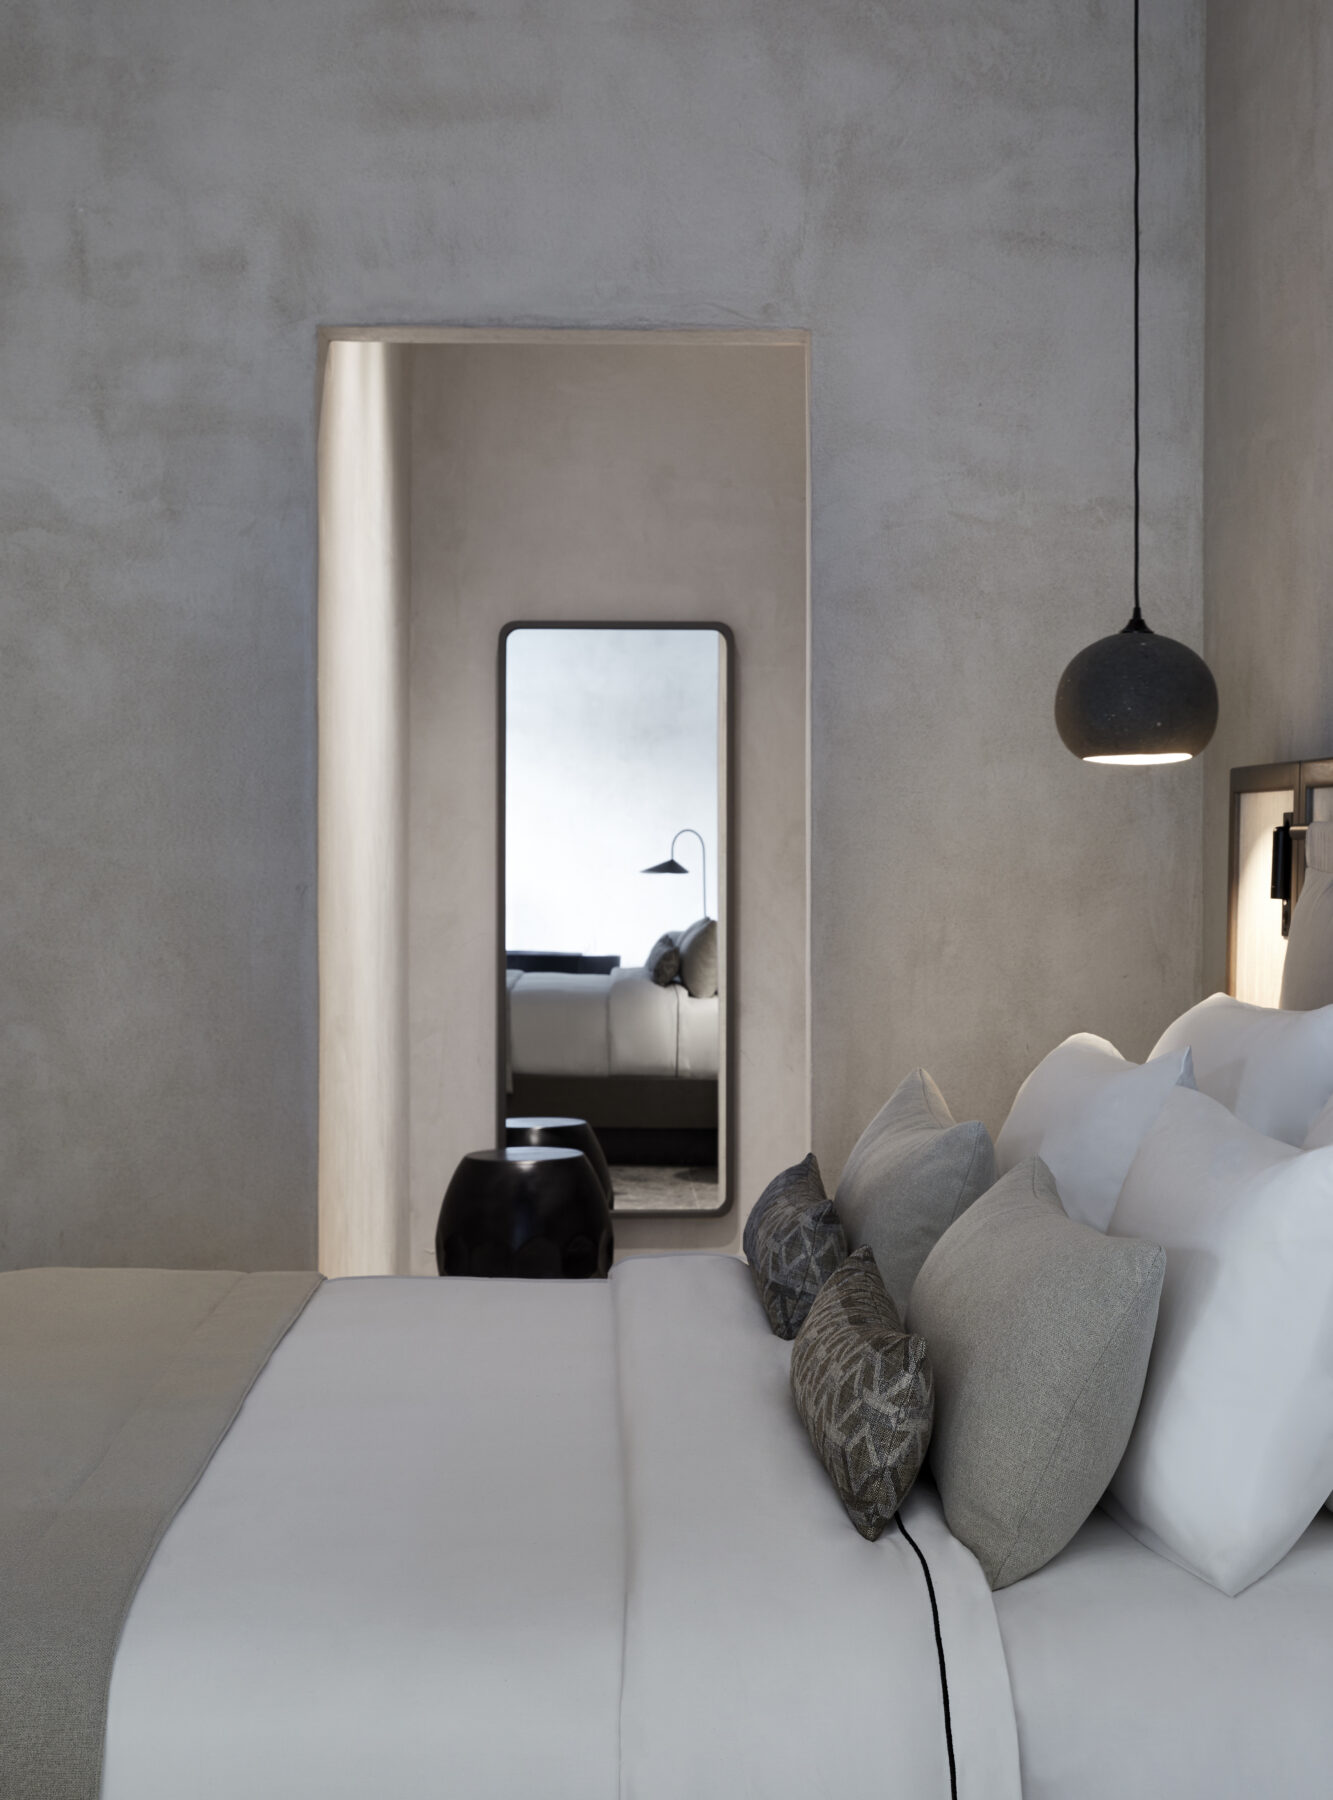 Archisearch Aeonic Suites and Spa Accommodation in Mykonos, Greece | Stones and Walls